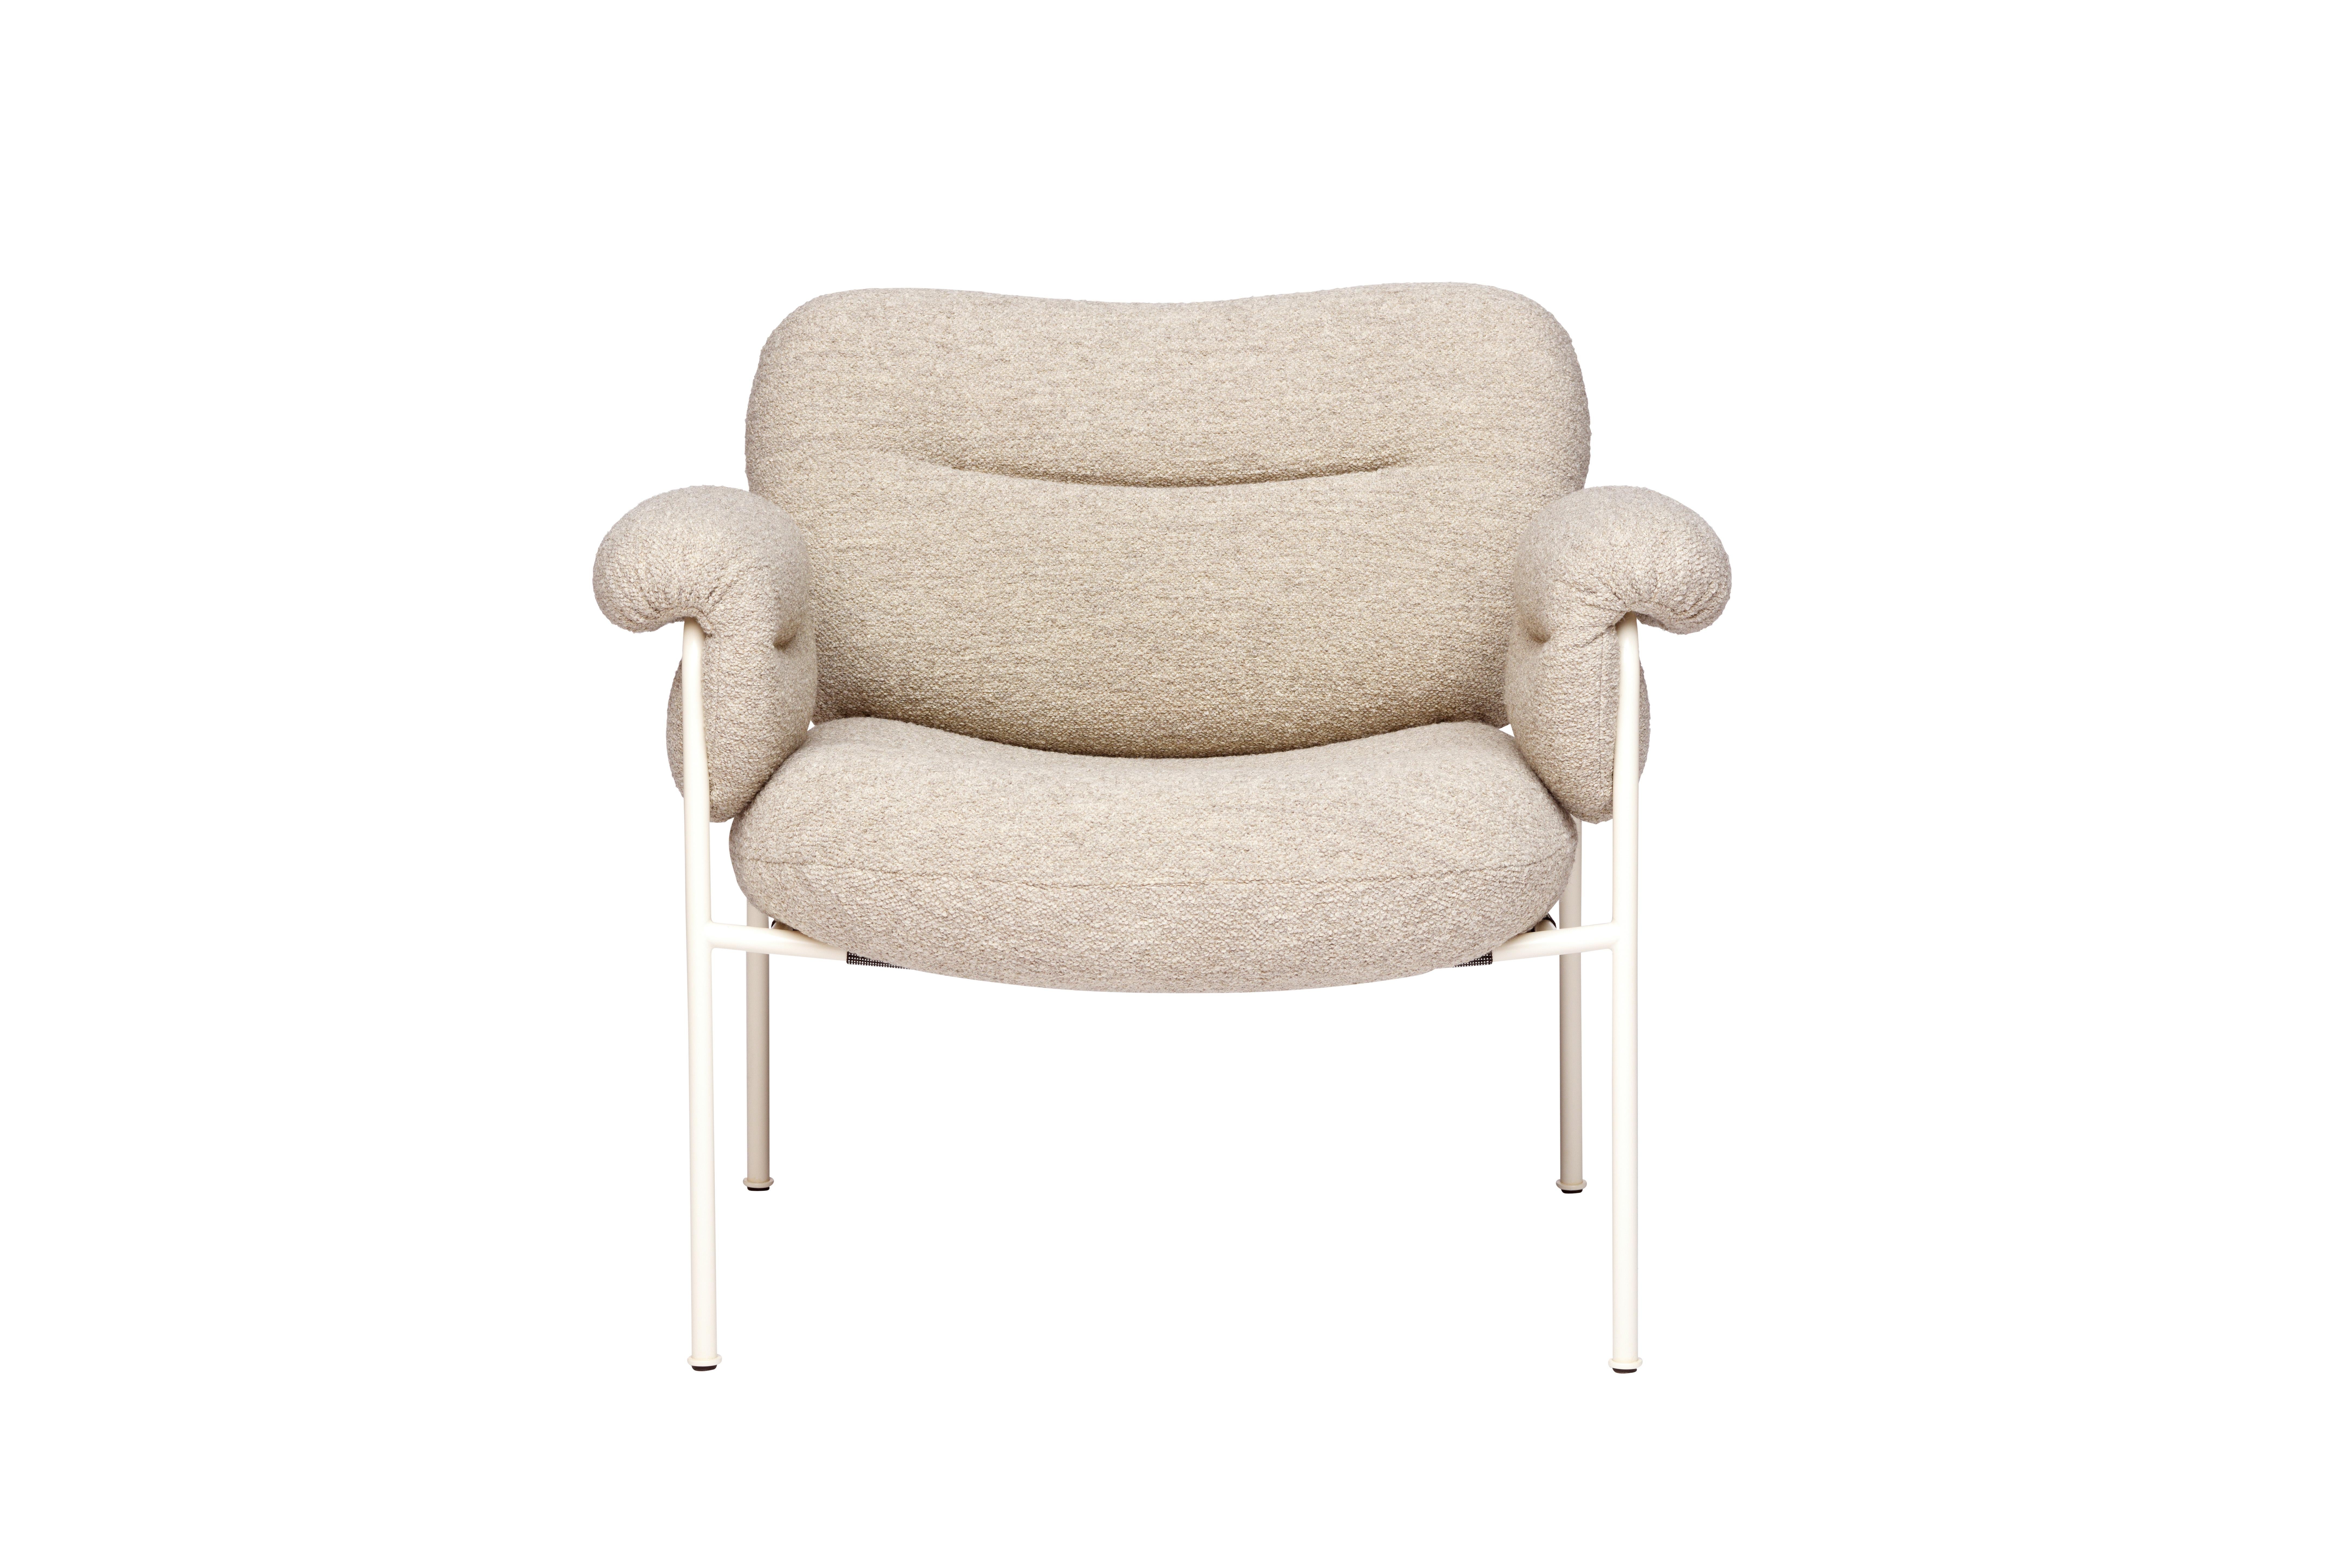 Bollo Armchair by Andreas Engesvik for FOGIA

Model shown on main images: White steel legs + Fabric: Barnum Bouclé col.02

Width: 81cm /32in
Depth: 81cm /32in
Height: 71cm /28in
Seat Height: 42.5cm /17in
Seat Depth: 54cm / 21in

The iconic Bollo